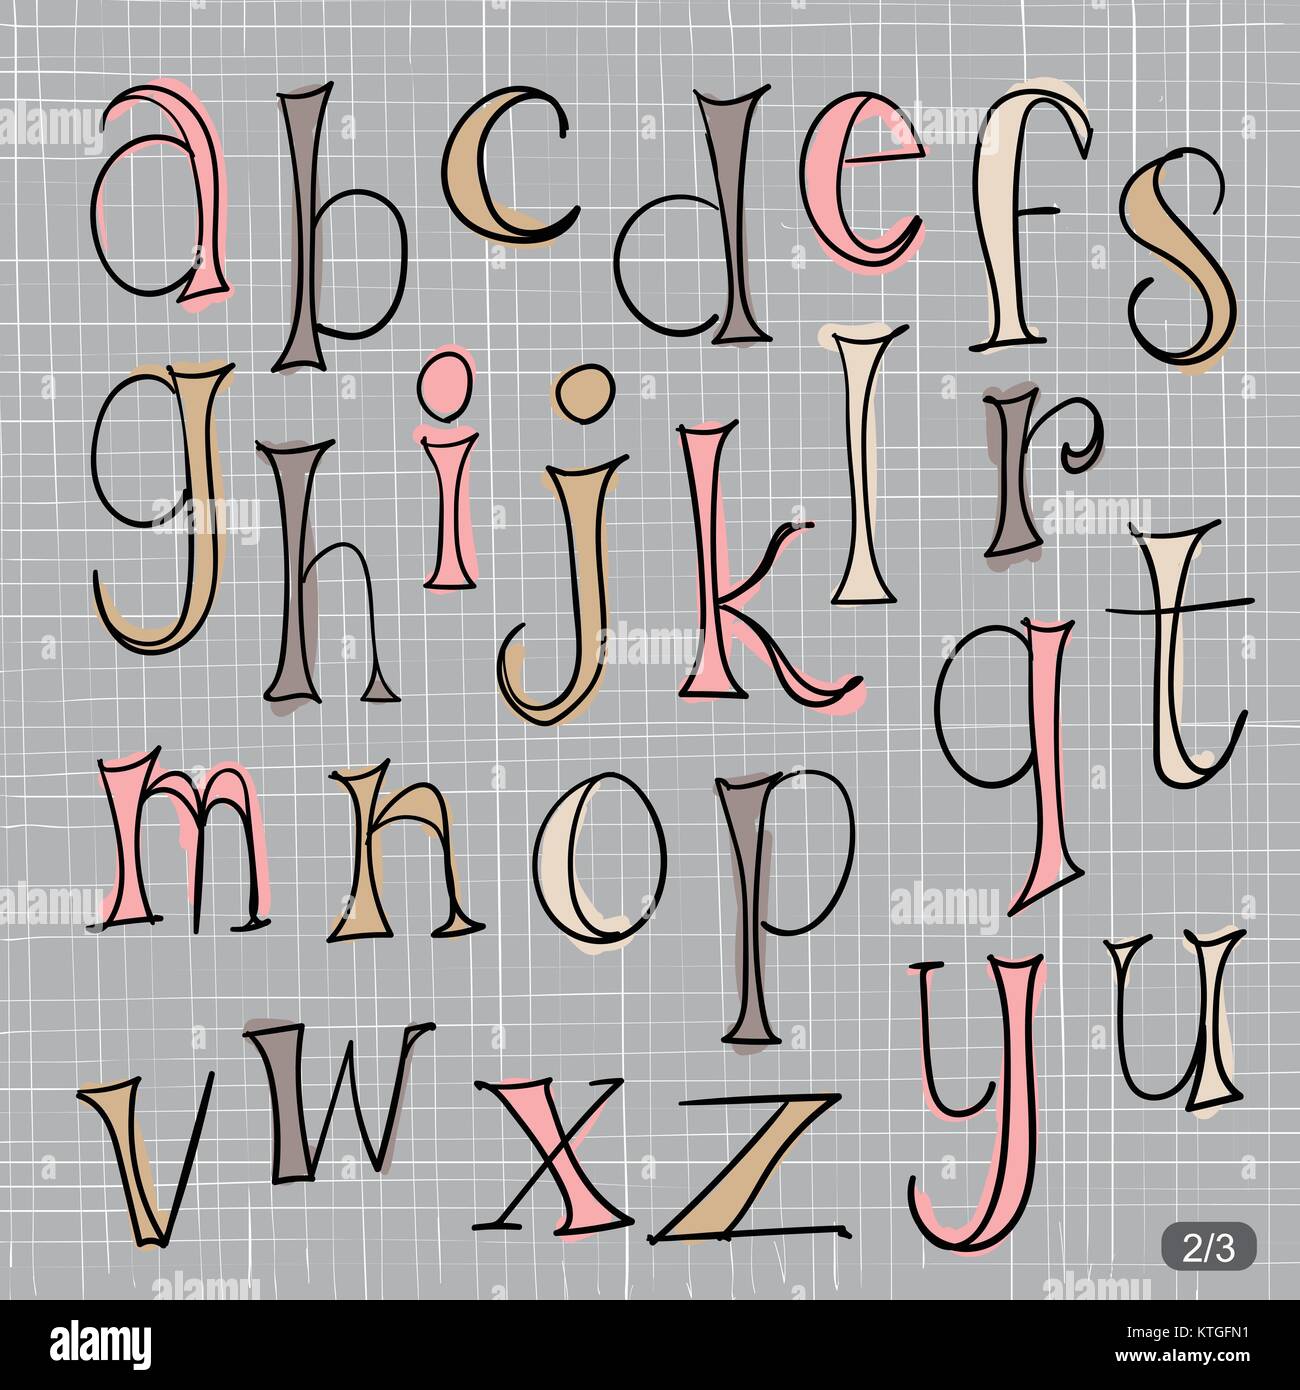 alphabet letters in style